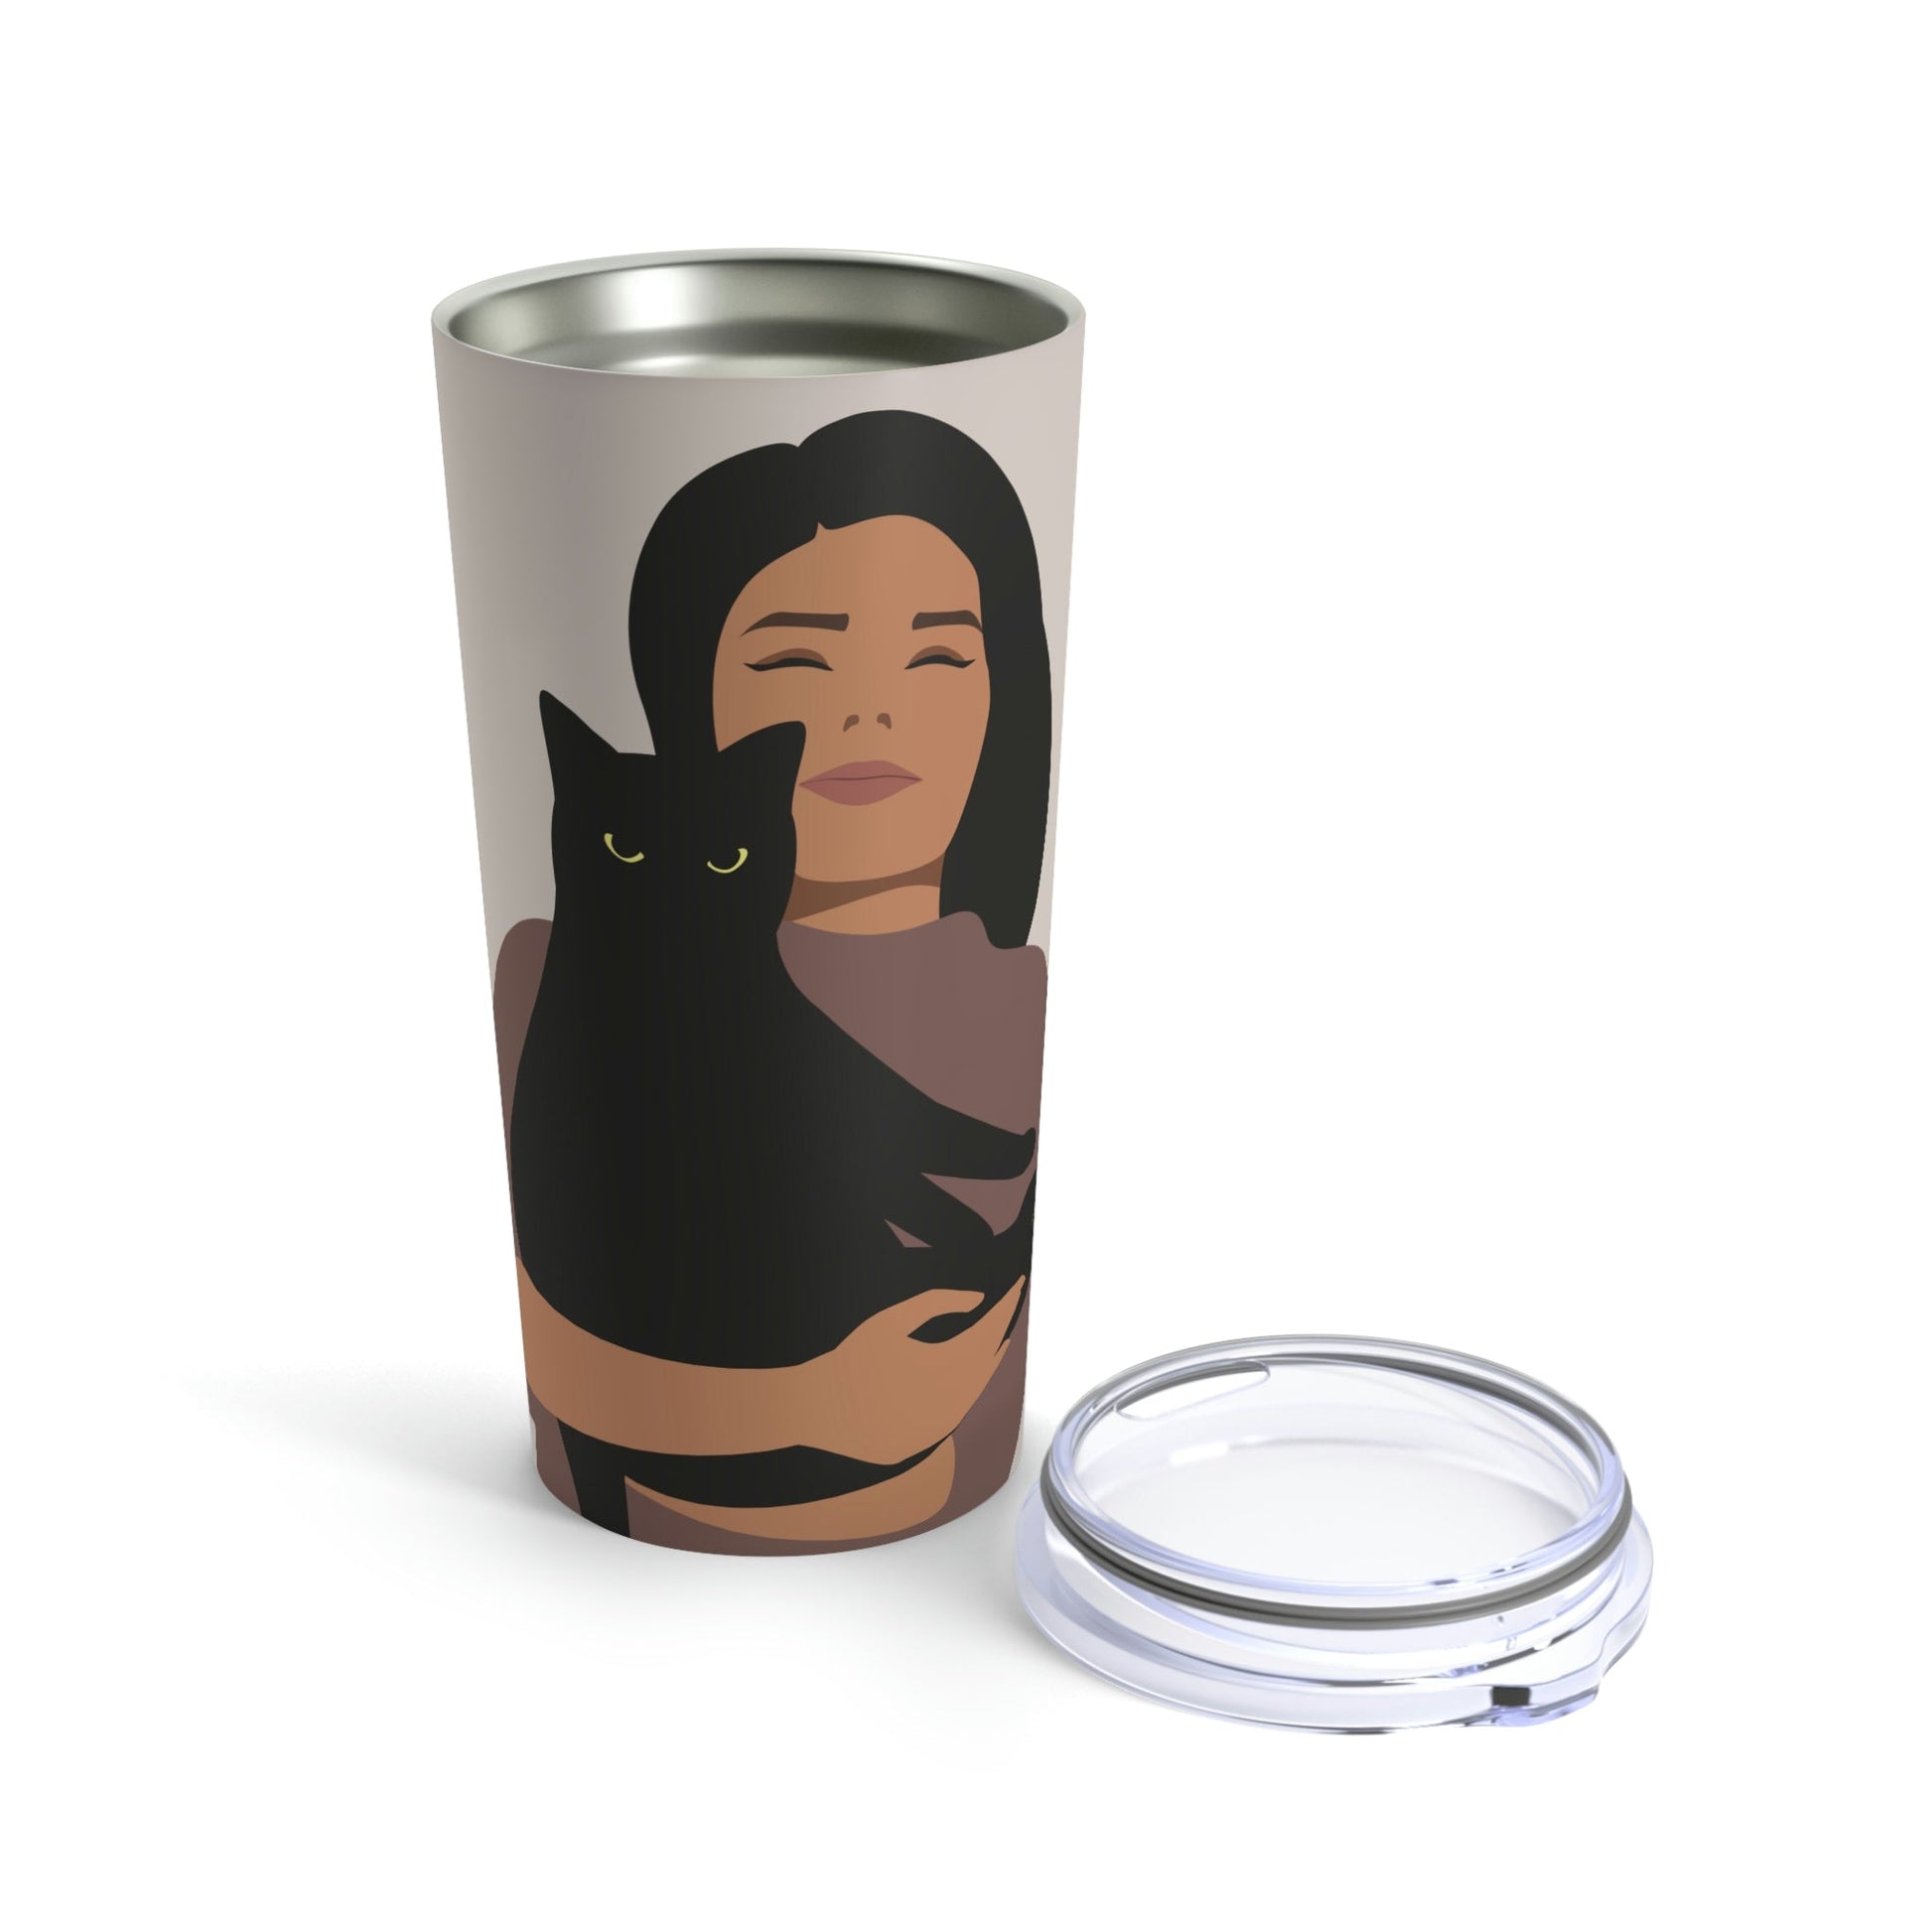 Woman with Black Cat Mininal Aesthetic Art Stainless Steel Hot or Cold Vacuum Tumbler 20oz Ichaku [Perfect Gifts Selection]